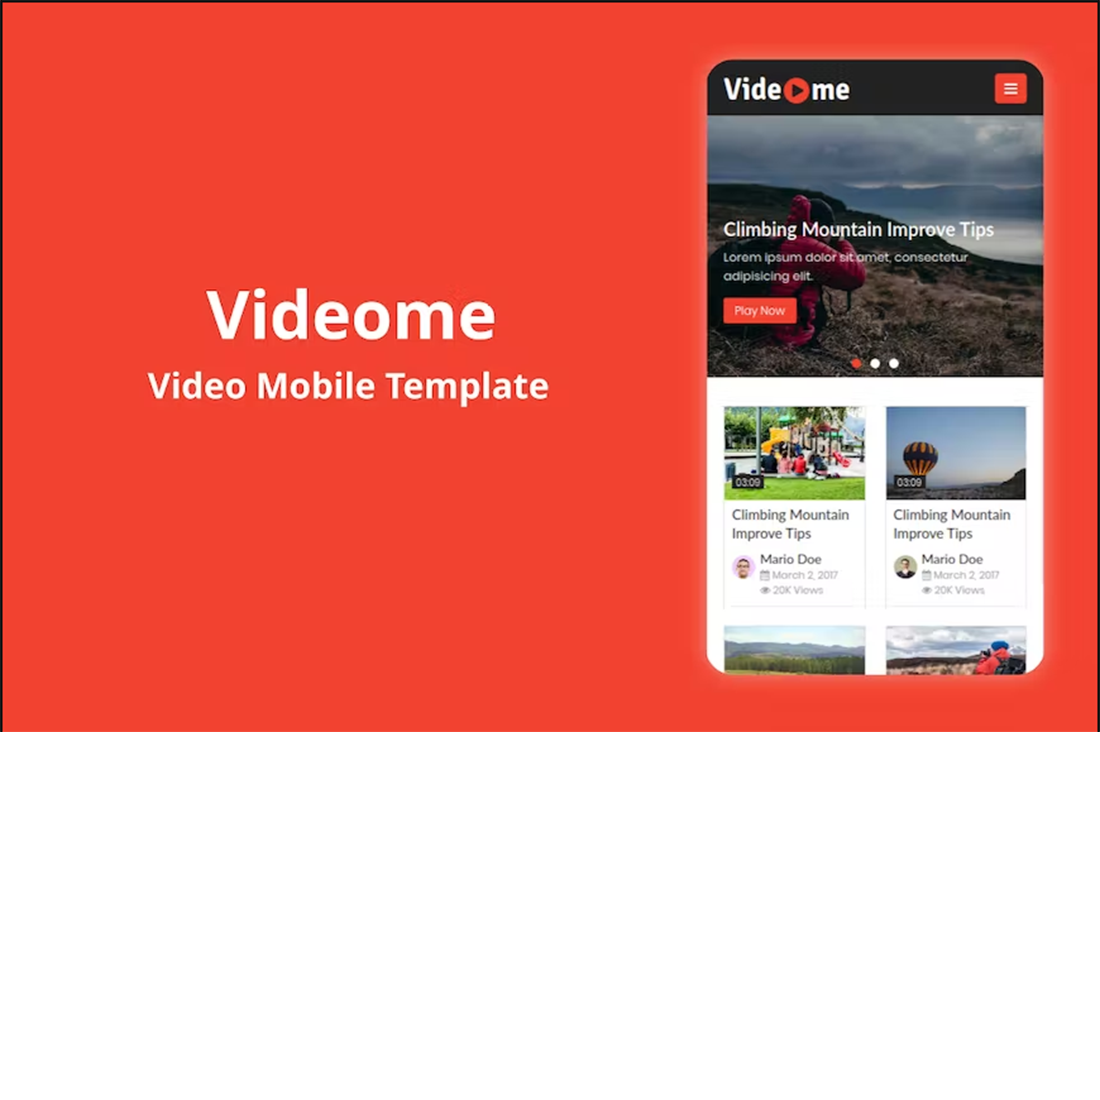 Free Videome Video Mobile Template cover image.